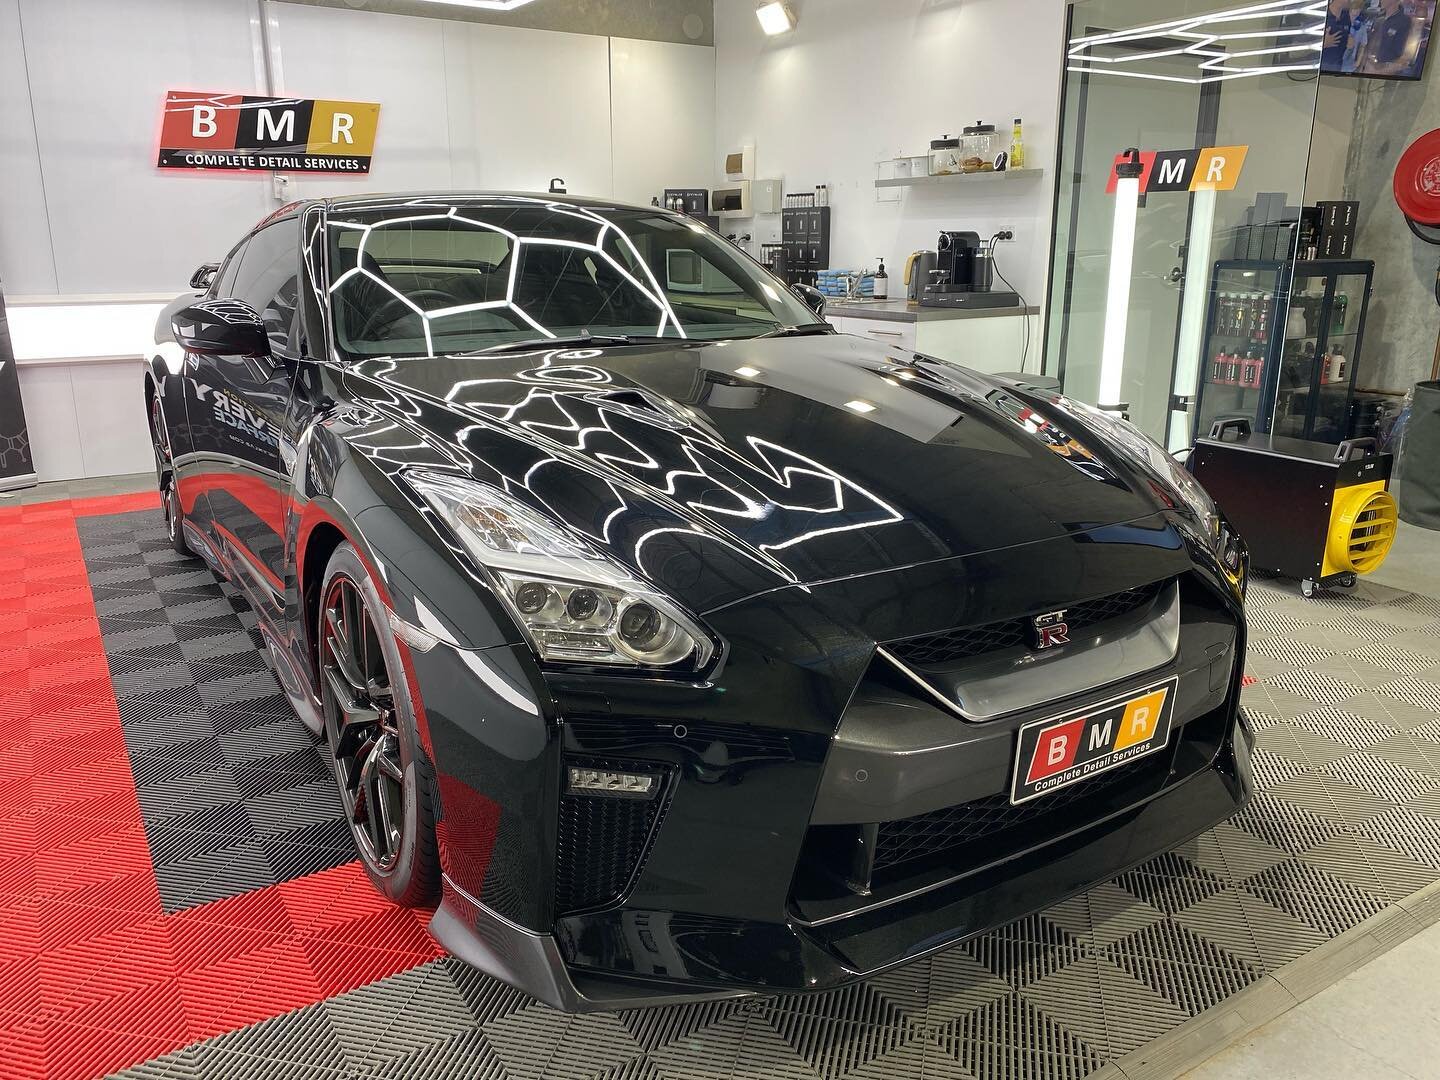 Nissan R35 GTR in for paint correction and coating. Received a single stage paint correction and some areas needed more attention. We laid down our Super slick Graphene coating to keep it protected and glossy for the next 5 years. Wheels &amp; glass 